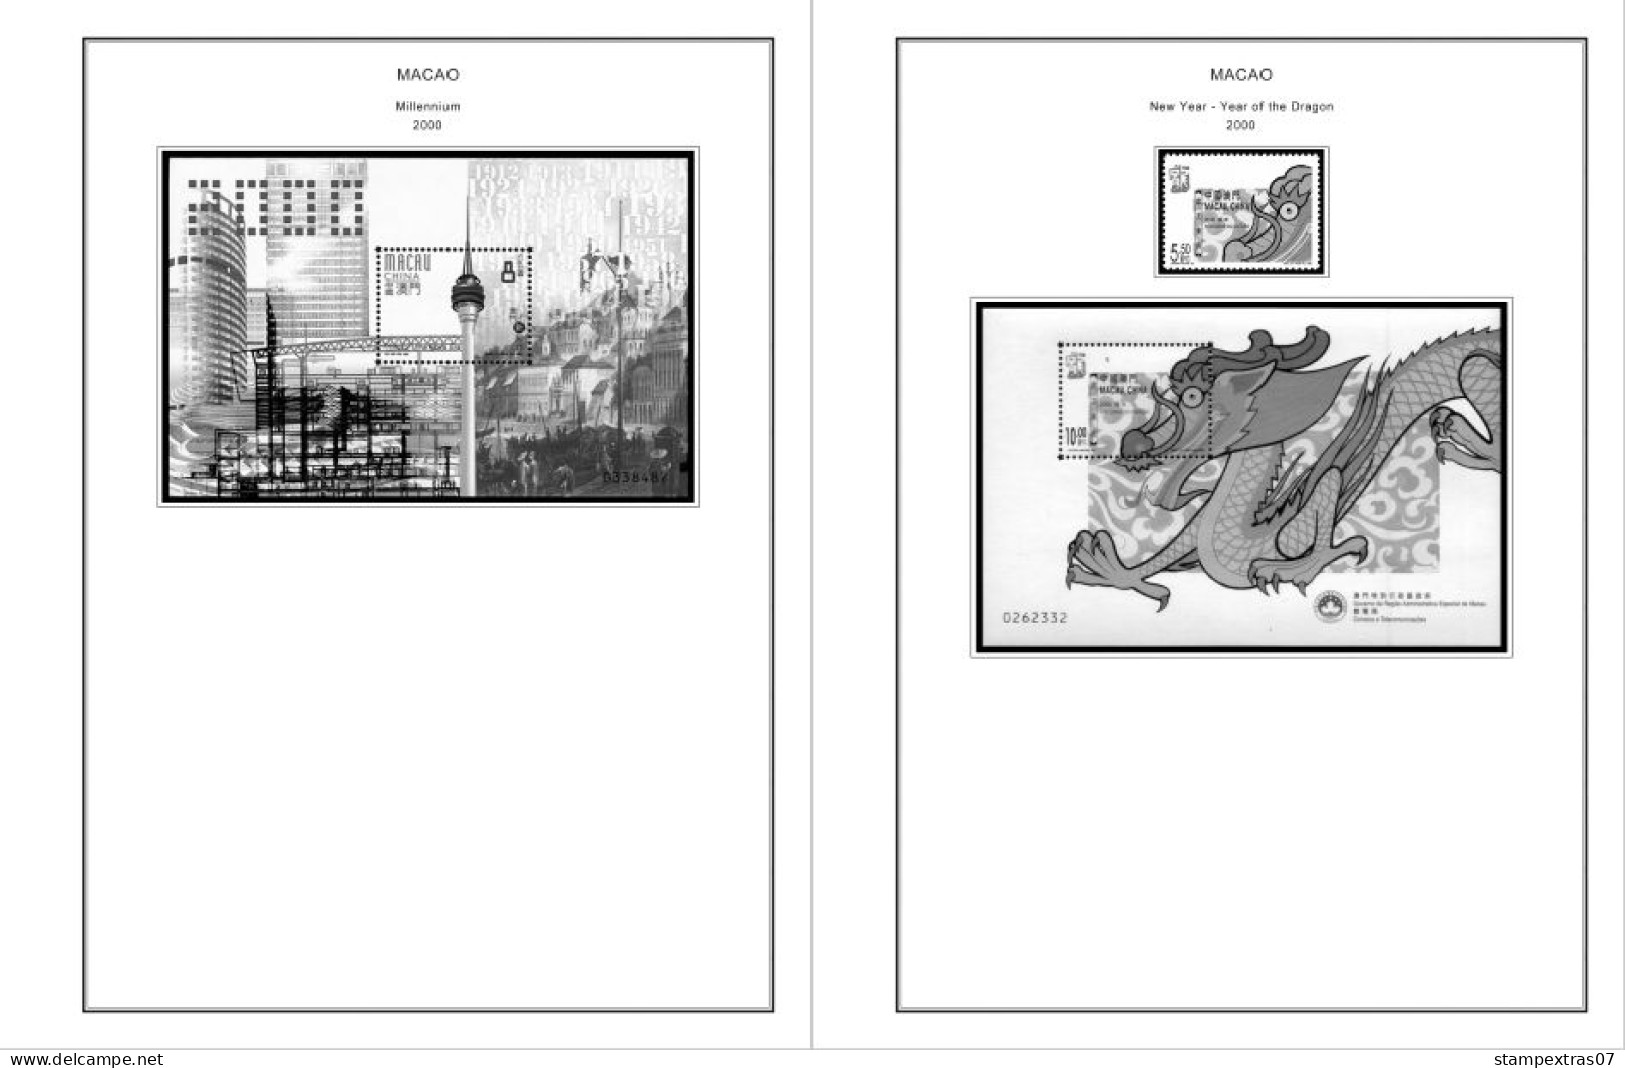 MACAO [SAR] 1999-2010 + 2011-2020 STAMP ALBUM PAGES (248 B&w Illustrated Pages) - Inglese